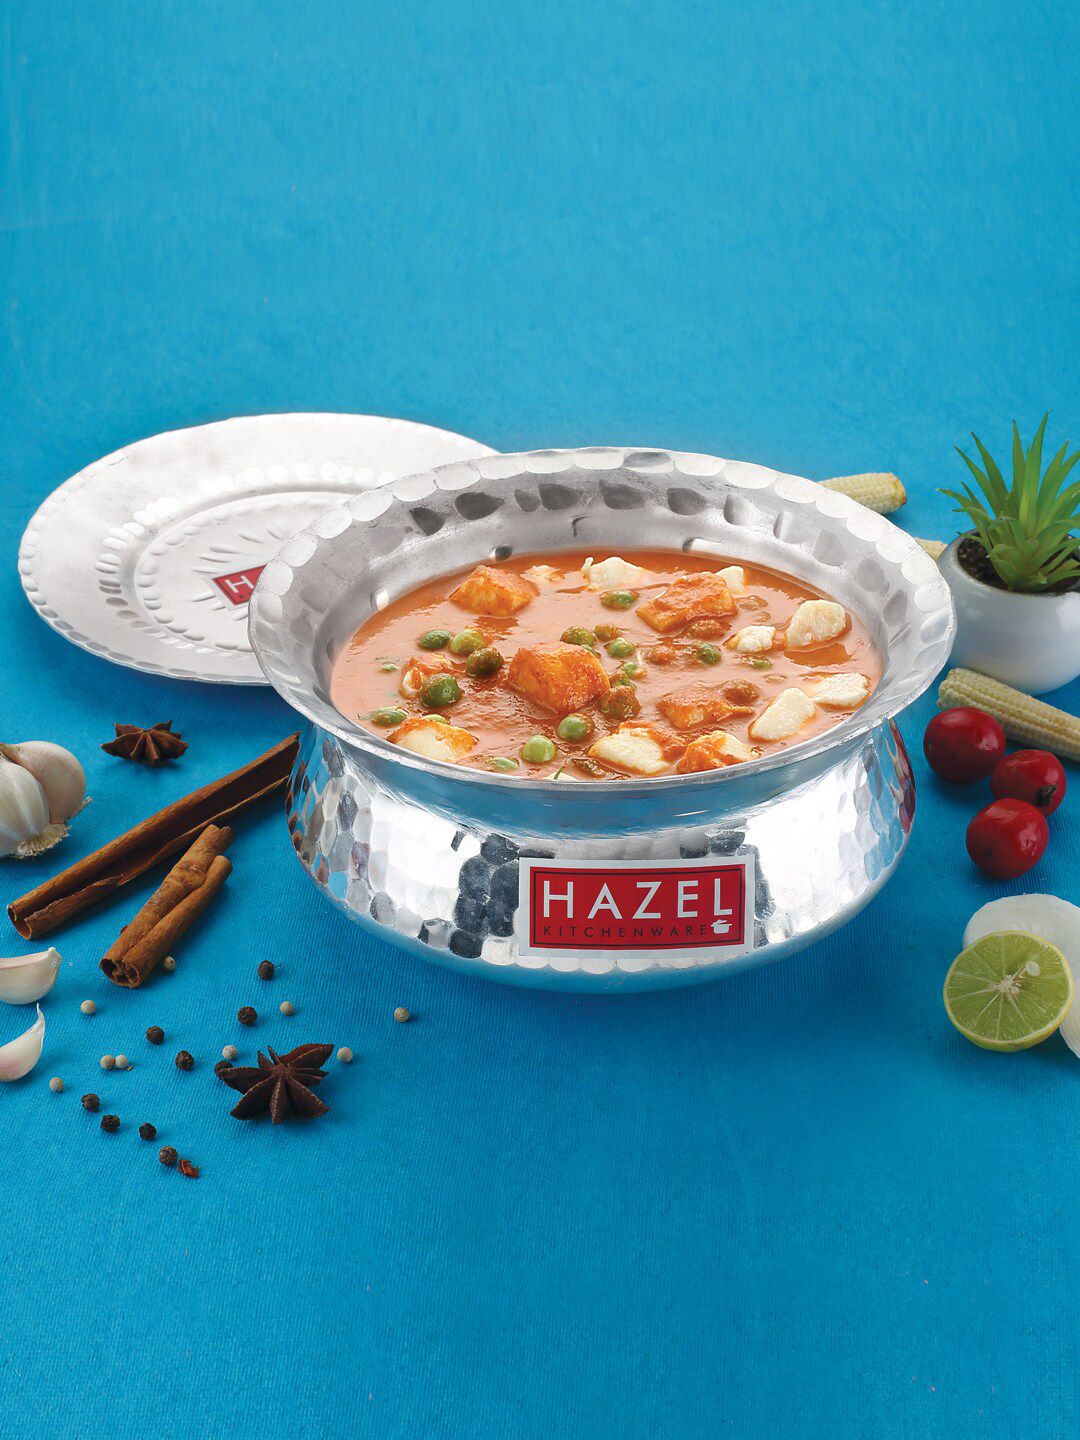 HAZEL Silver-Toned Hammered Aluminium Handi With Lid 2400 Ml Price in India